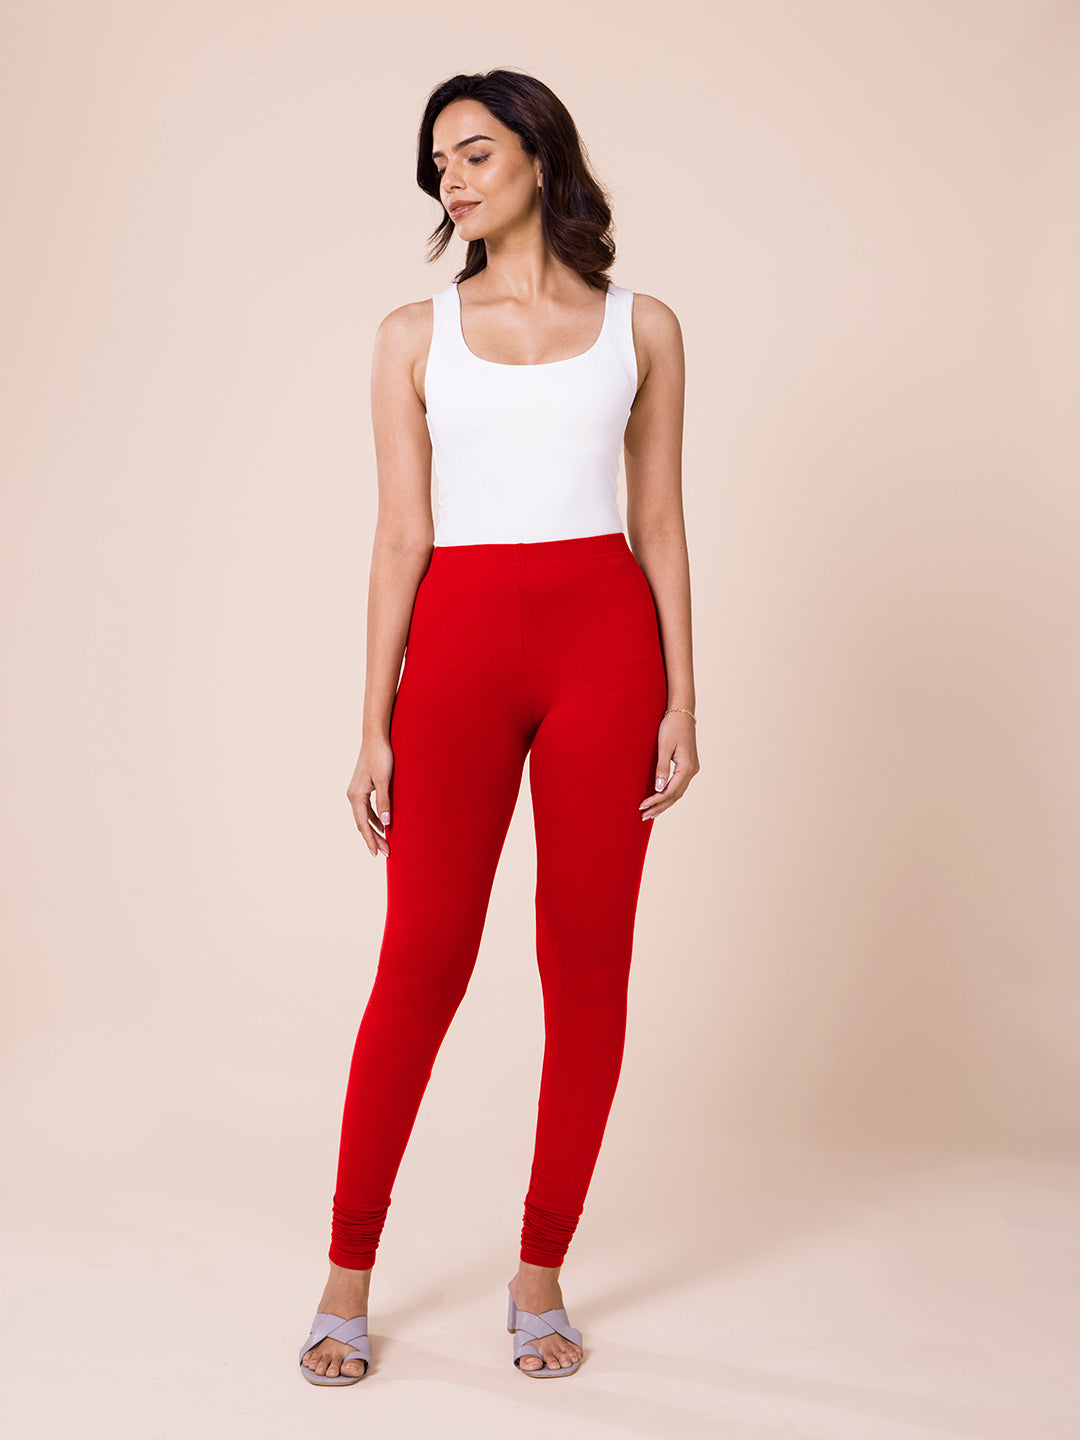 Buy online Hot Red Churidar Leggings from Churidars & Salwars for Women by  Tsg Breeze for ₹599 at 0% off